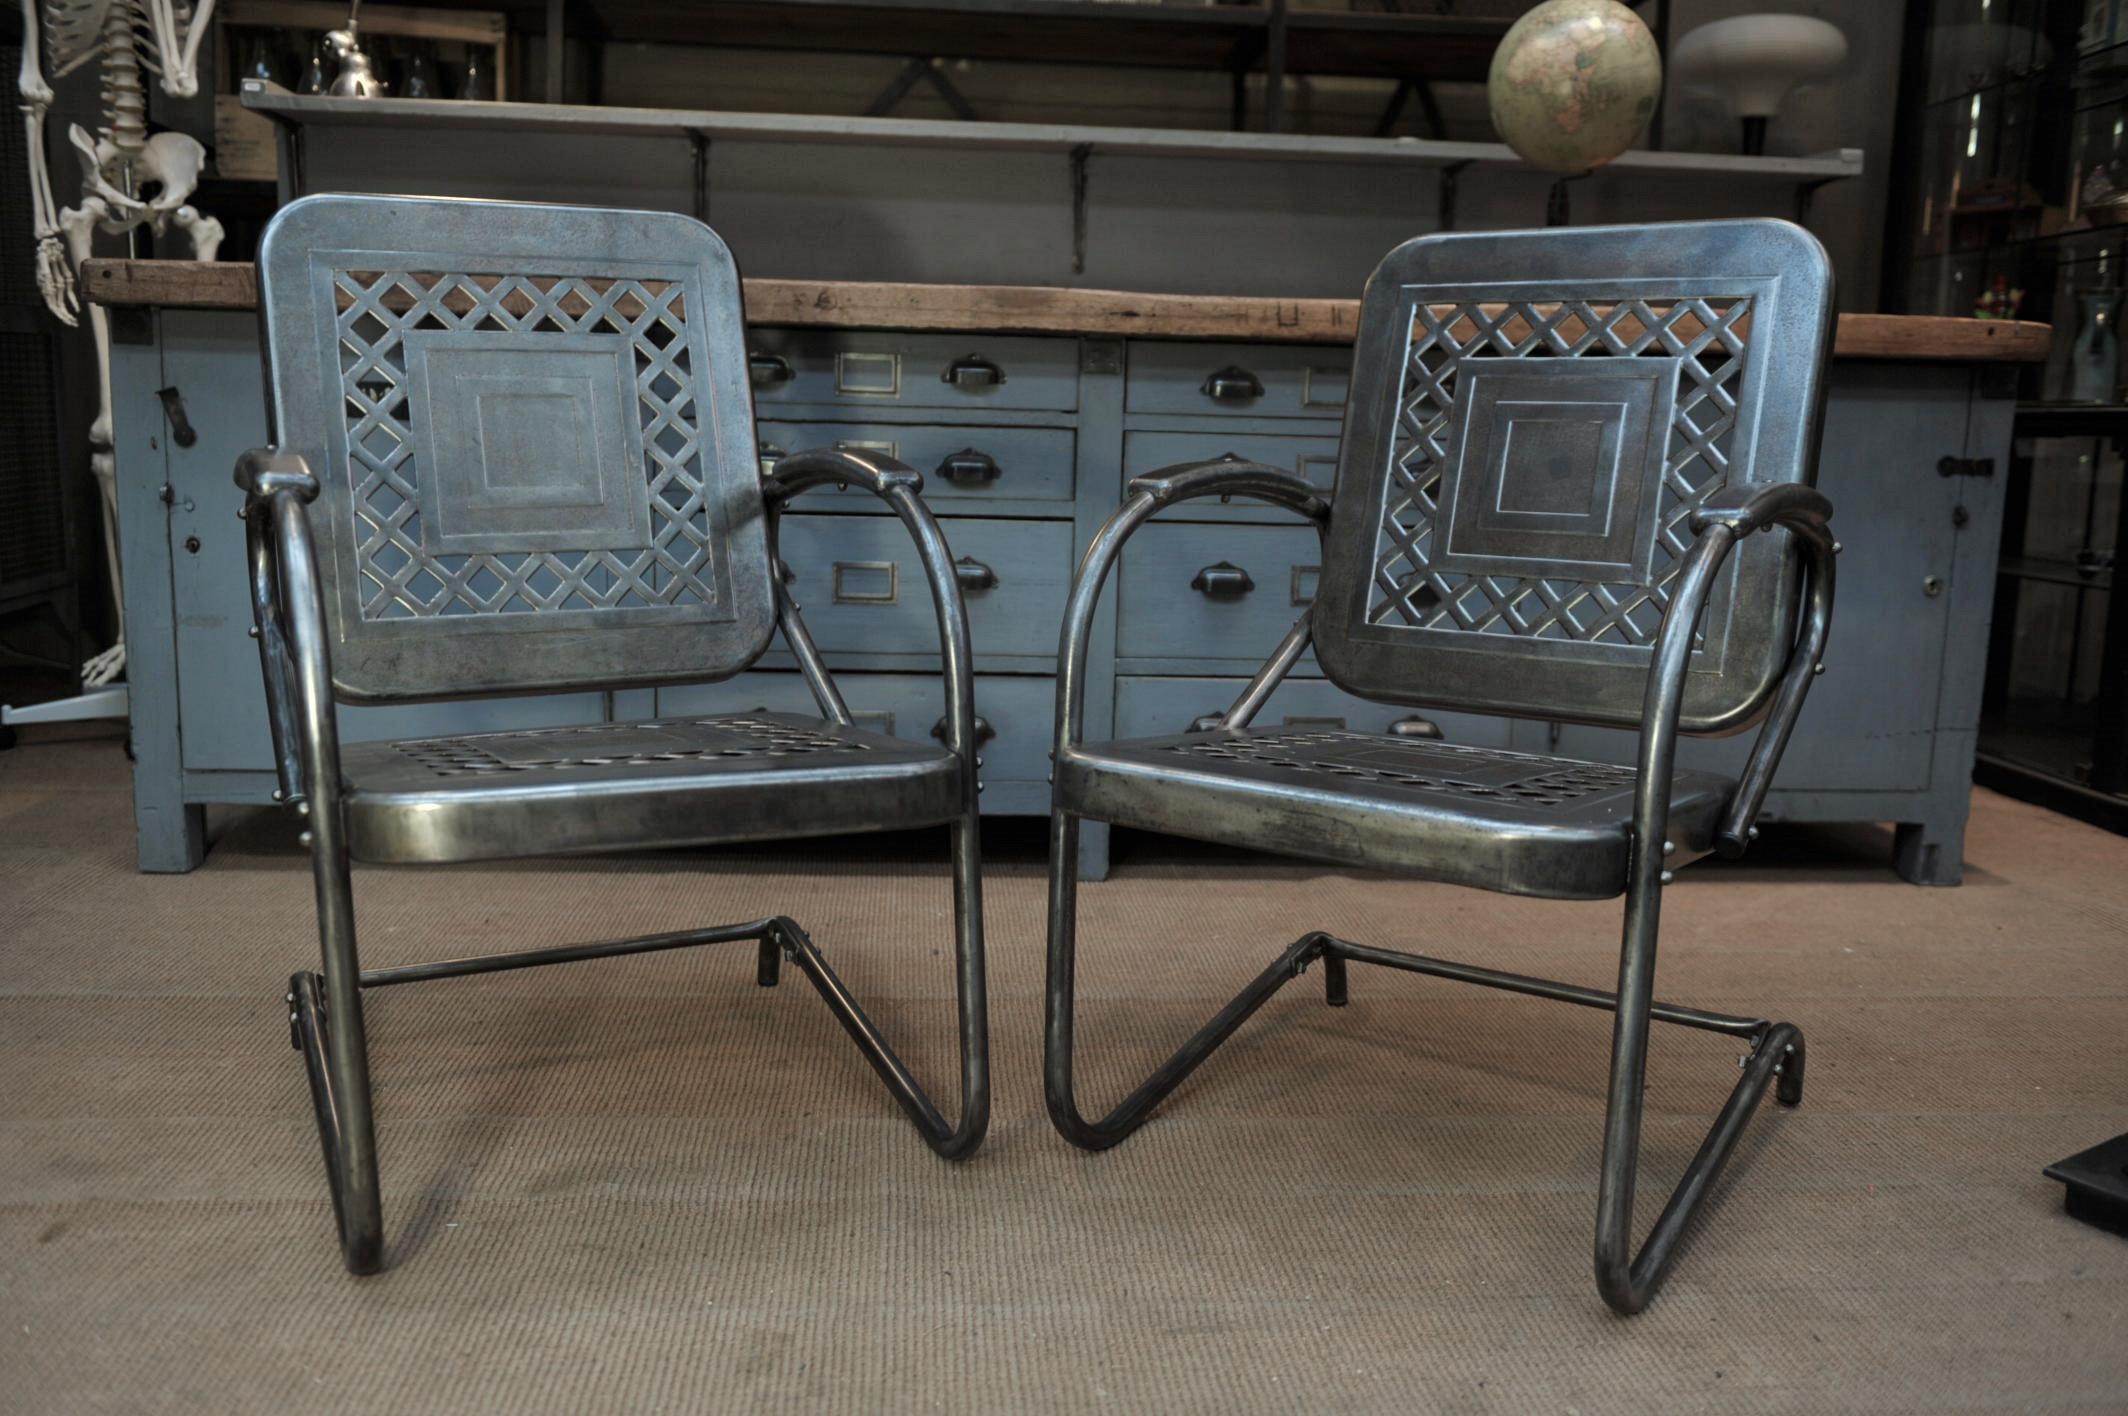 Pair of perforated metal garden armchairs or chairs, 1950s. Polished finish all in very good condition.